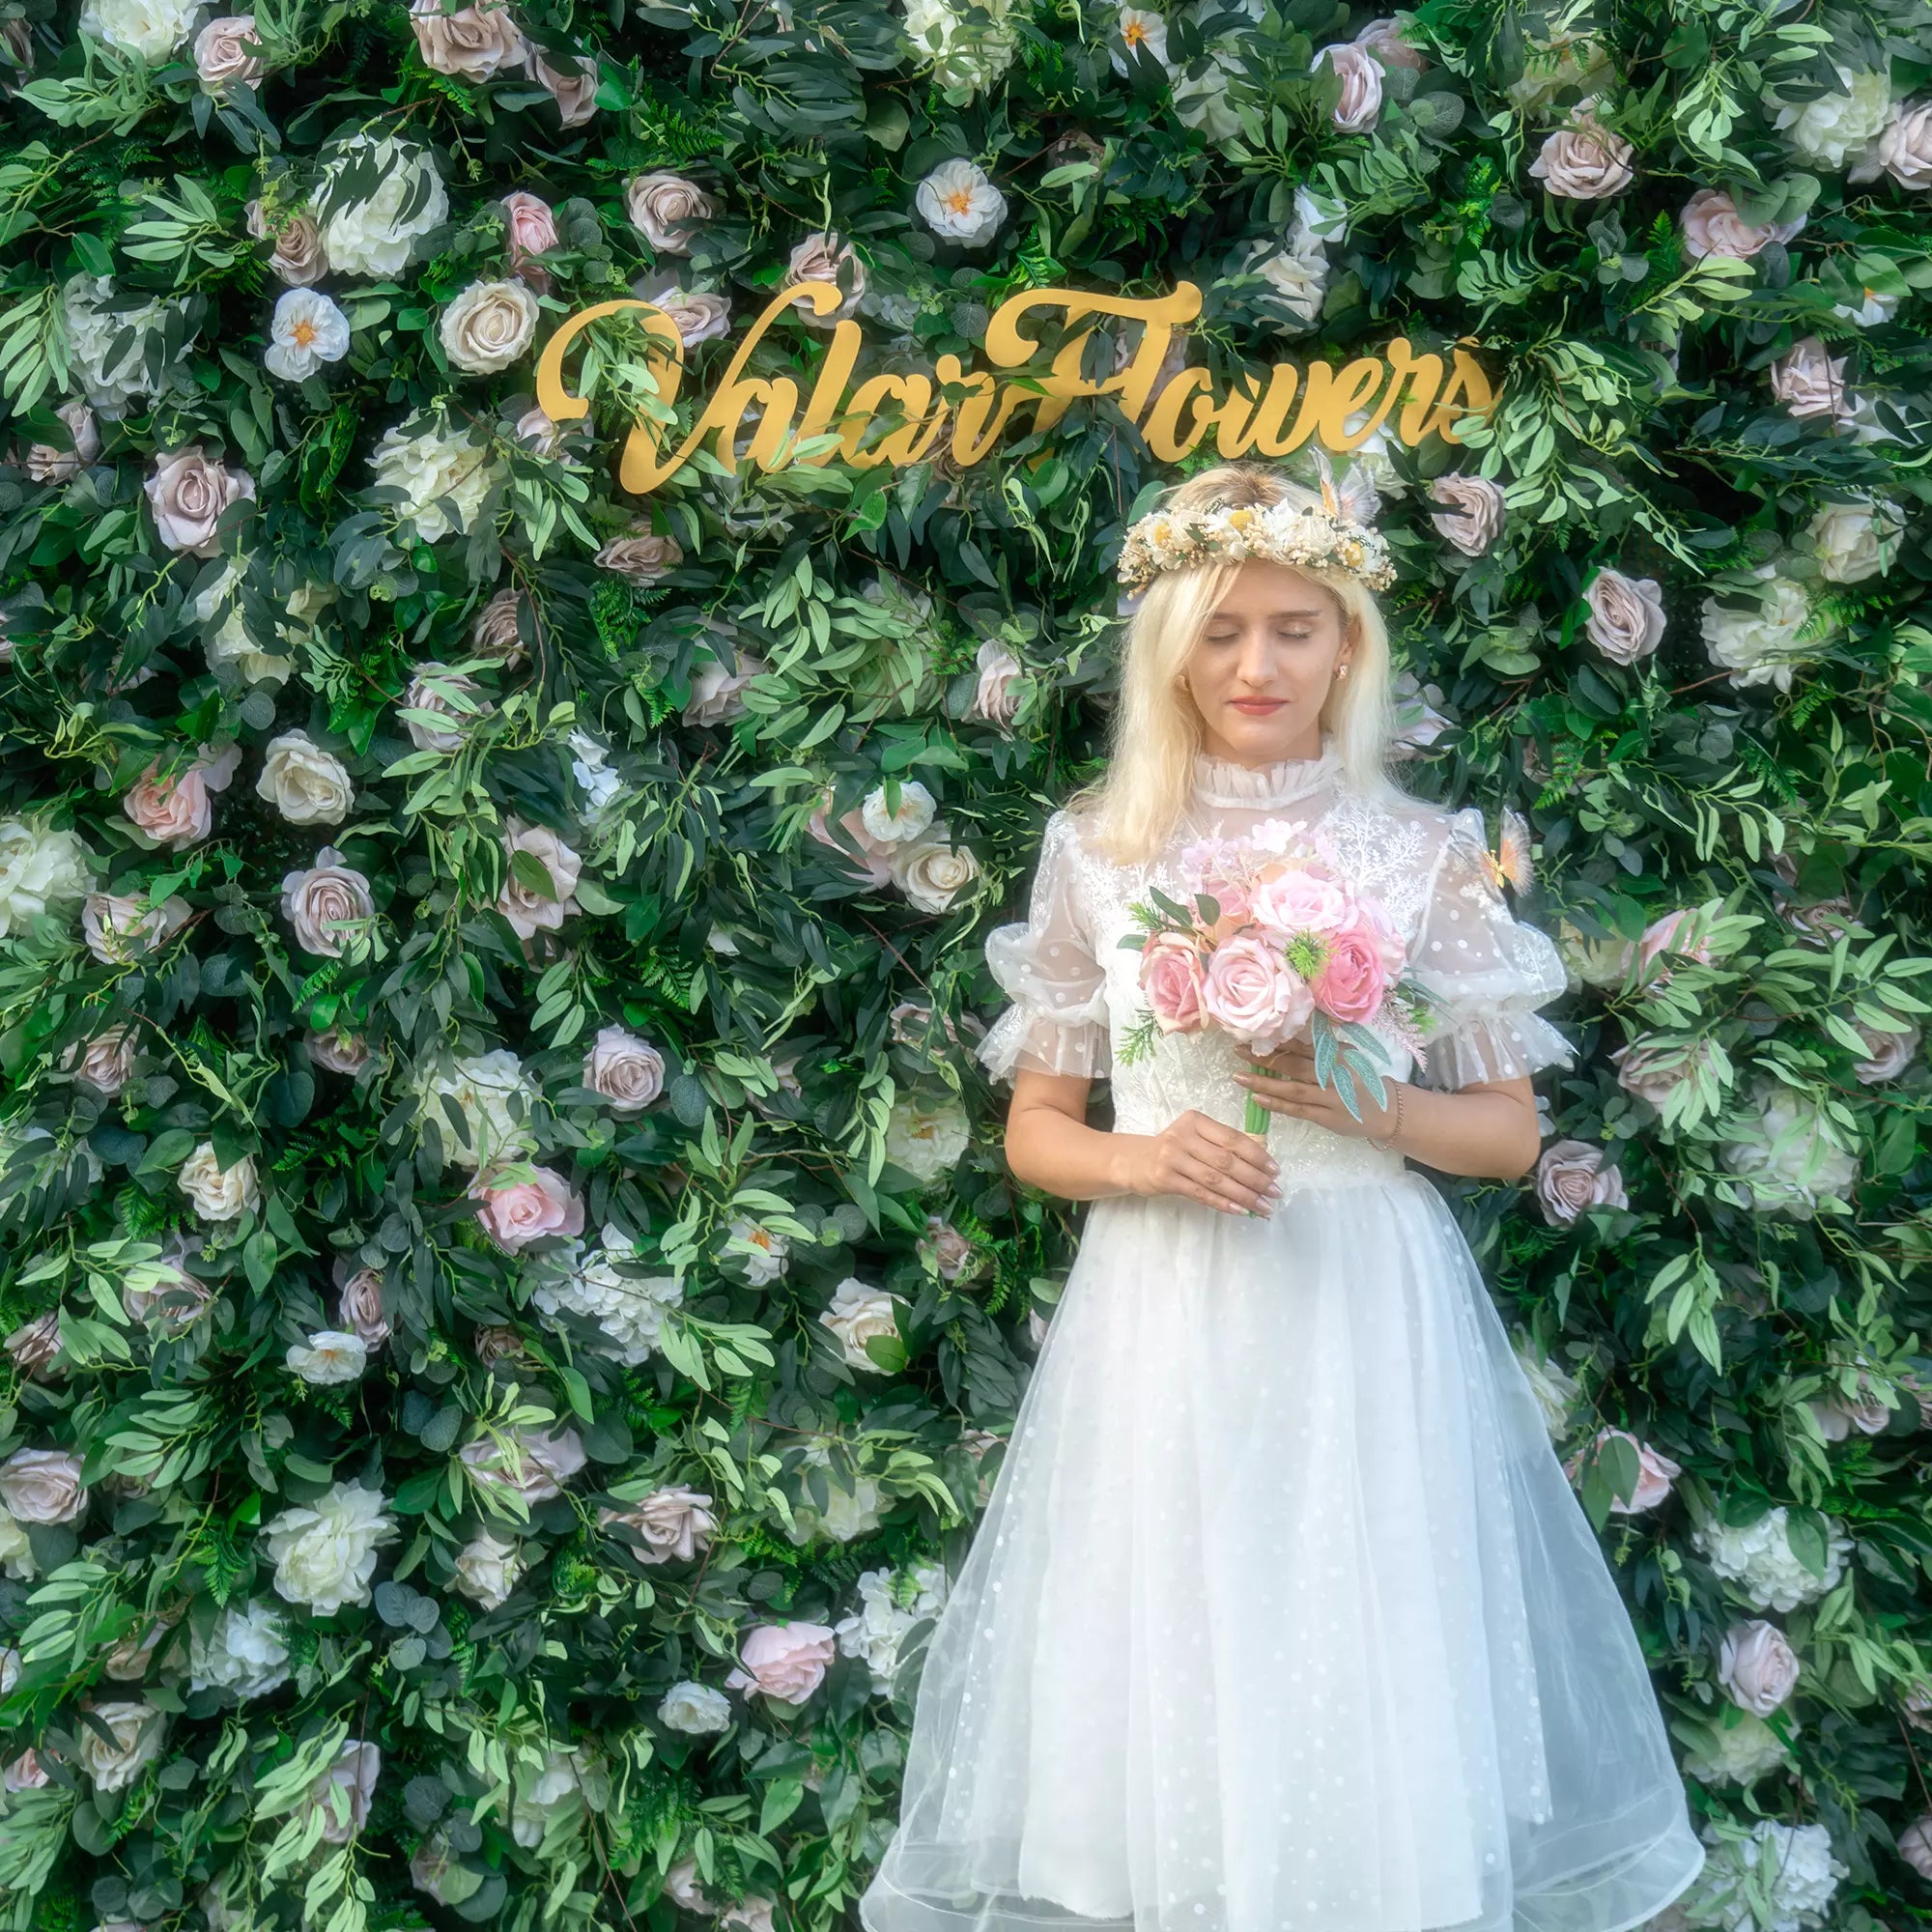 Elevate any event with the "Valar Flowers" Deluxe Floral Wall. Handcrafted with premium artificial roses, it's the ideal backdrop for memorable photos. Perfect for weddings, parties & more. Durable & UV resistant. A blend of luxury & nature's beauty.